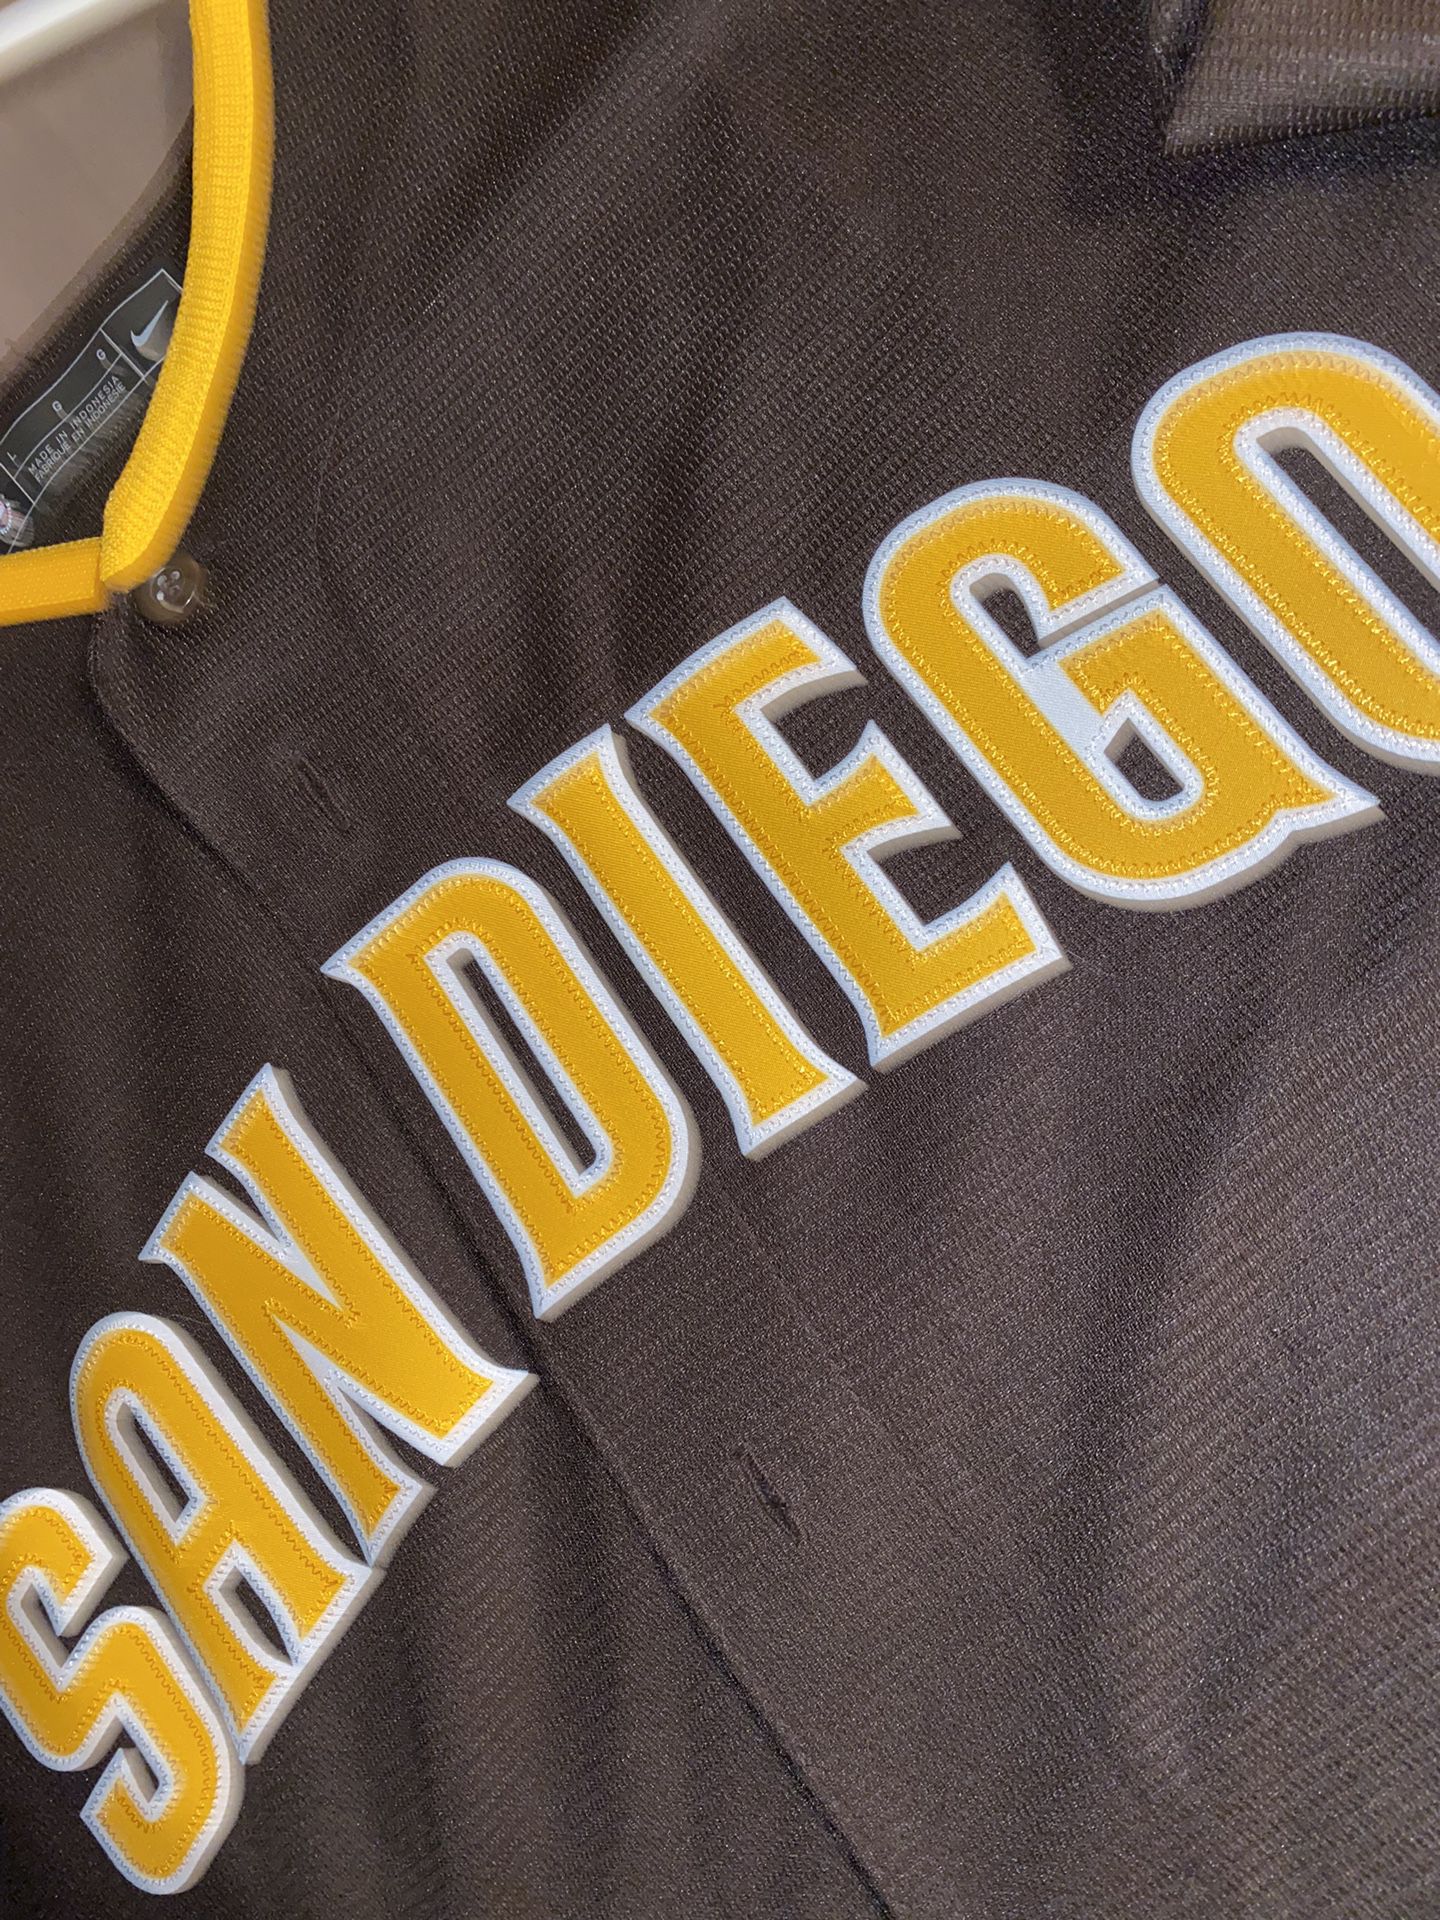 Joe Musgrove San Diego Padres Jersey for Sale in Lakeside, CA - OfferUp